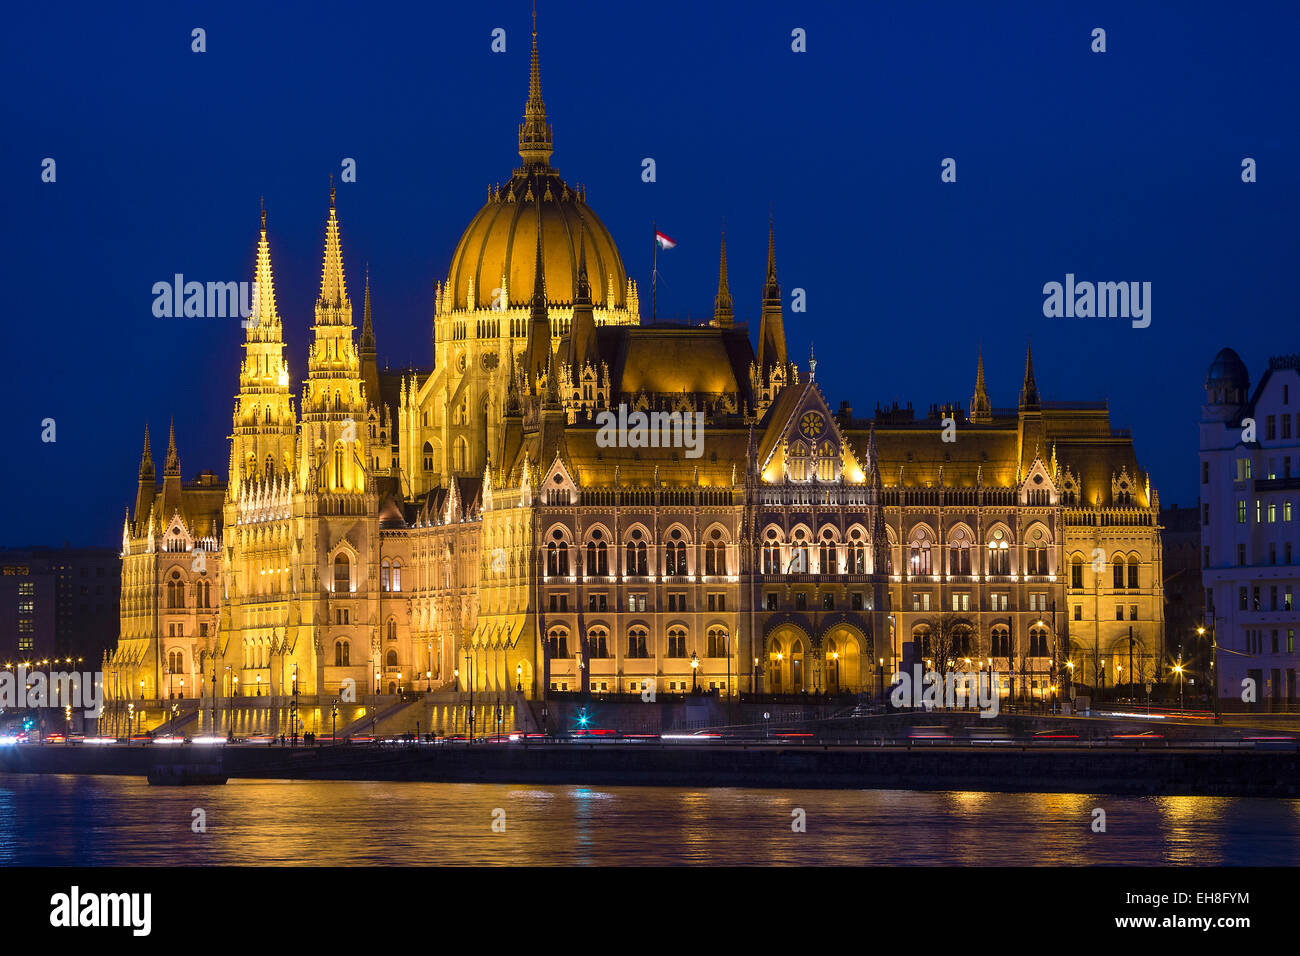 Parliament House on the Danube river, Budapest, Hungary, at dusk. Stock Photo